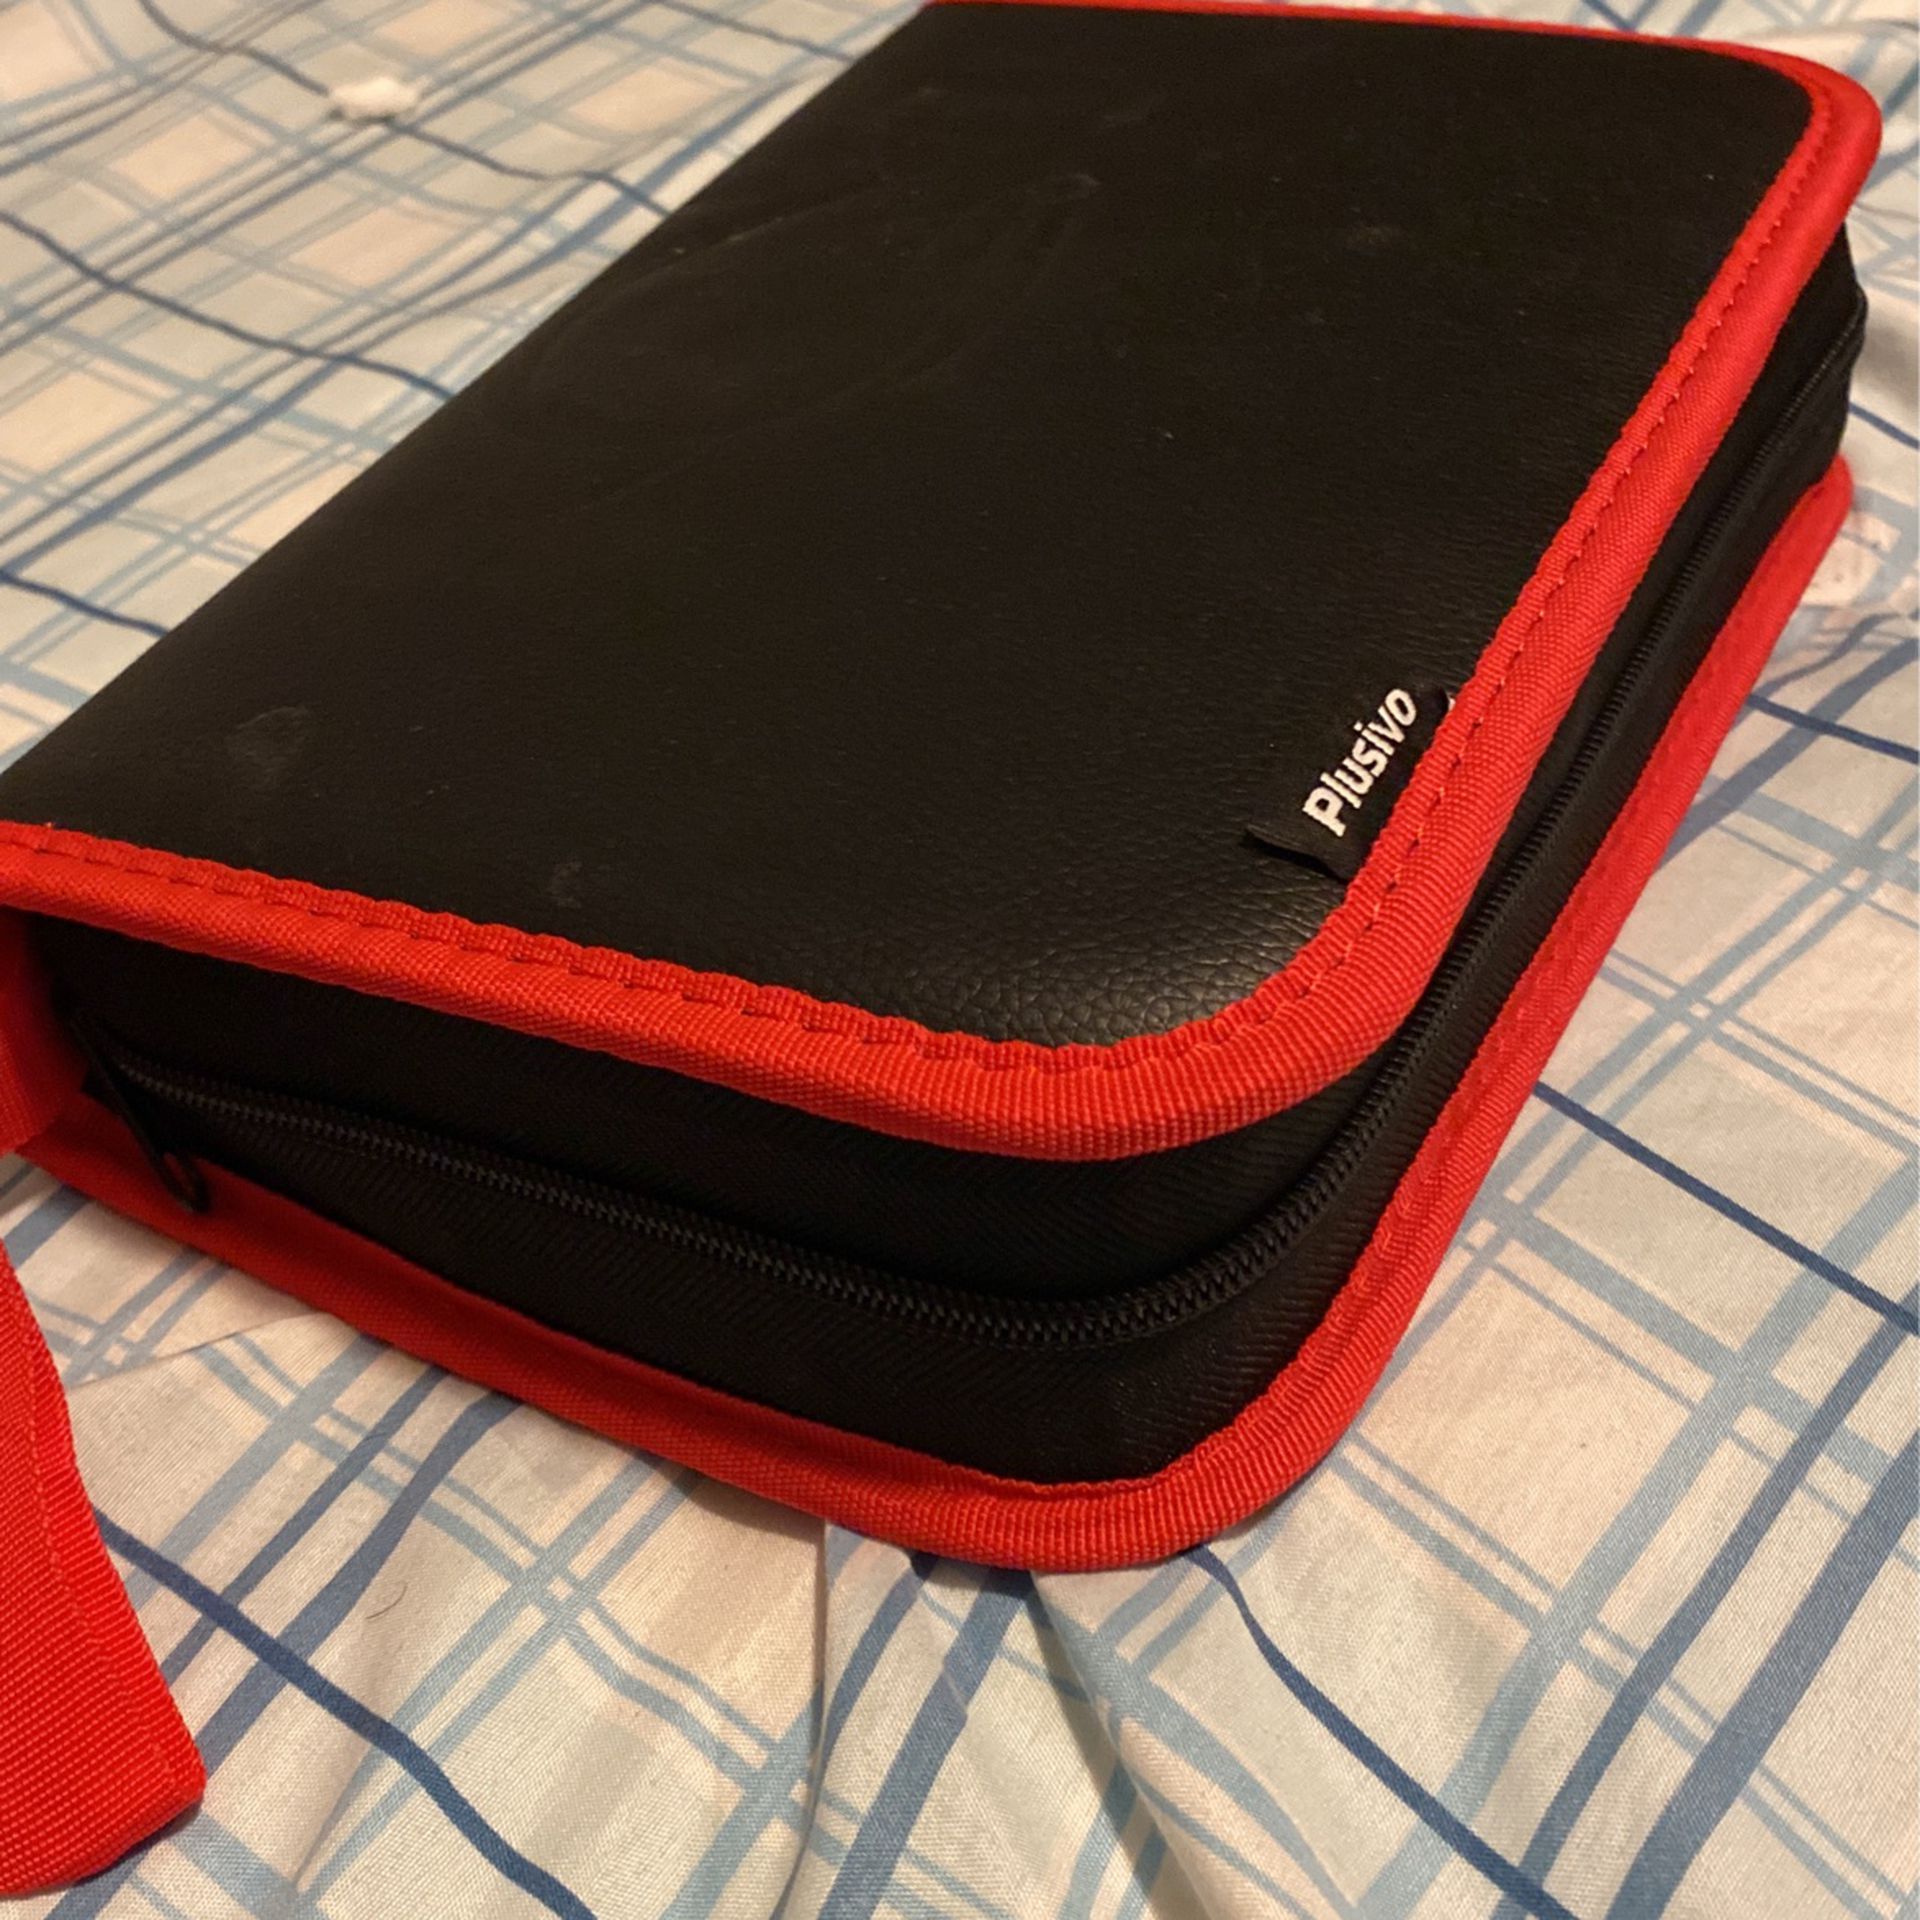 Carrying Case With Tools